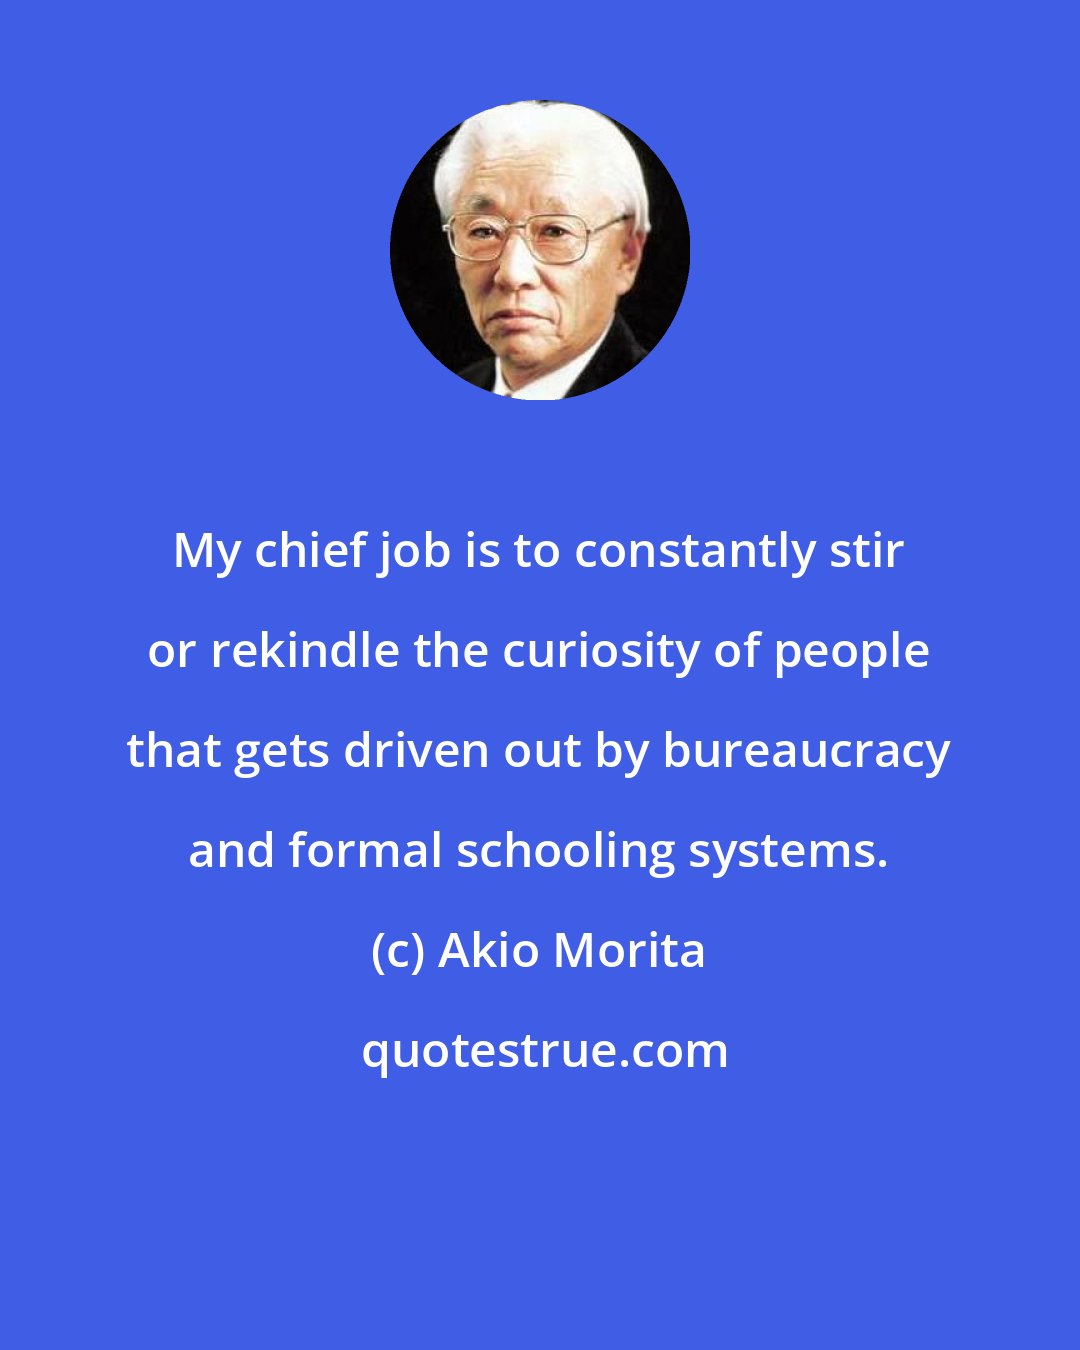 Akio Morita: My chief job is to constantly stir or rekindle the curiosity of people that gets driven out by bureaucracy and formal schooling systems.